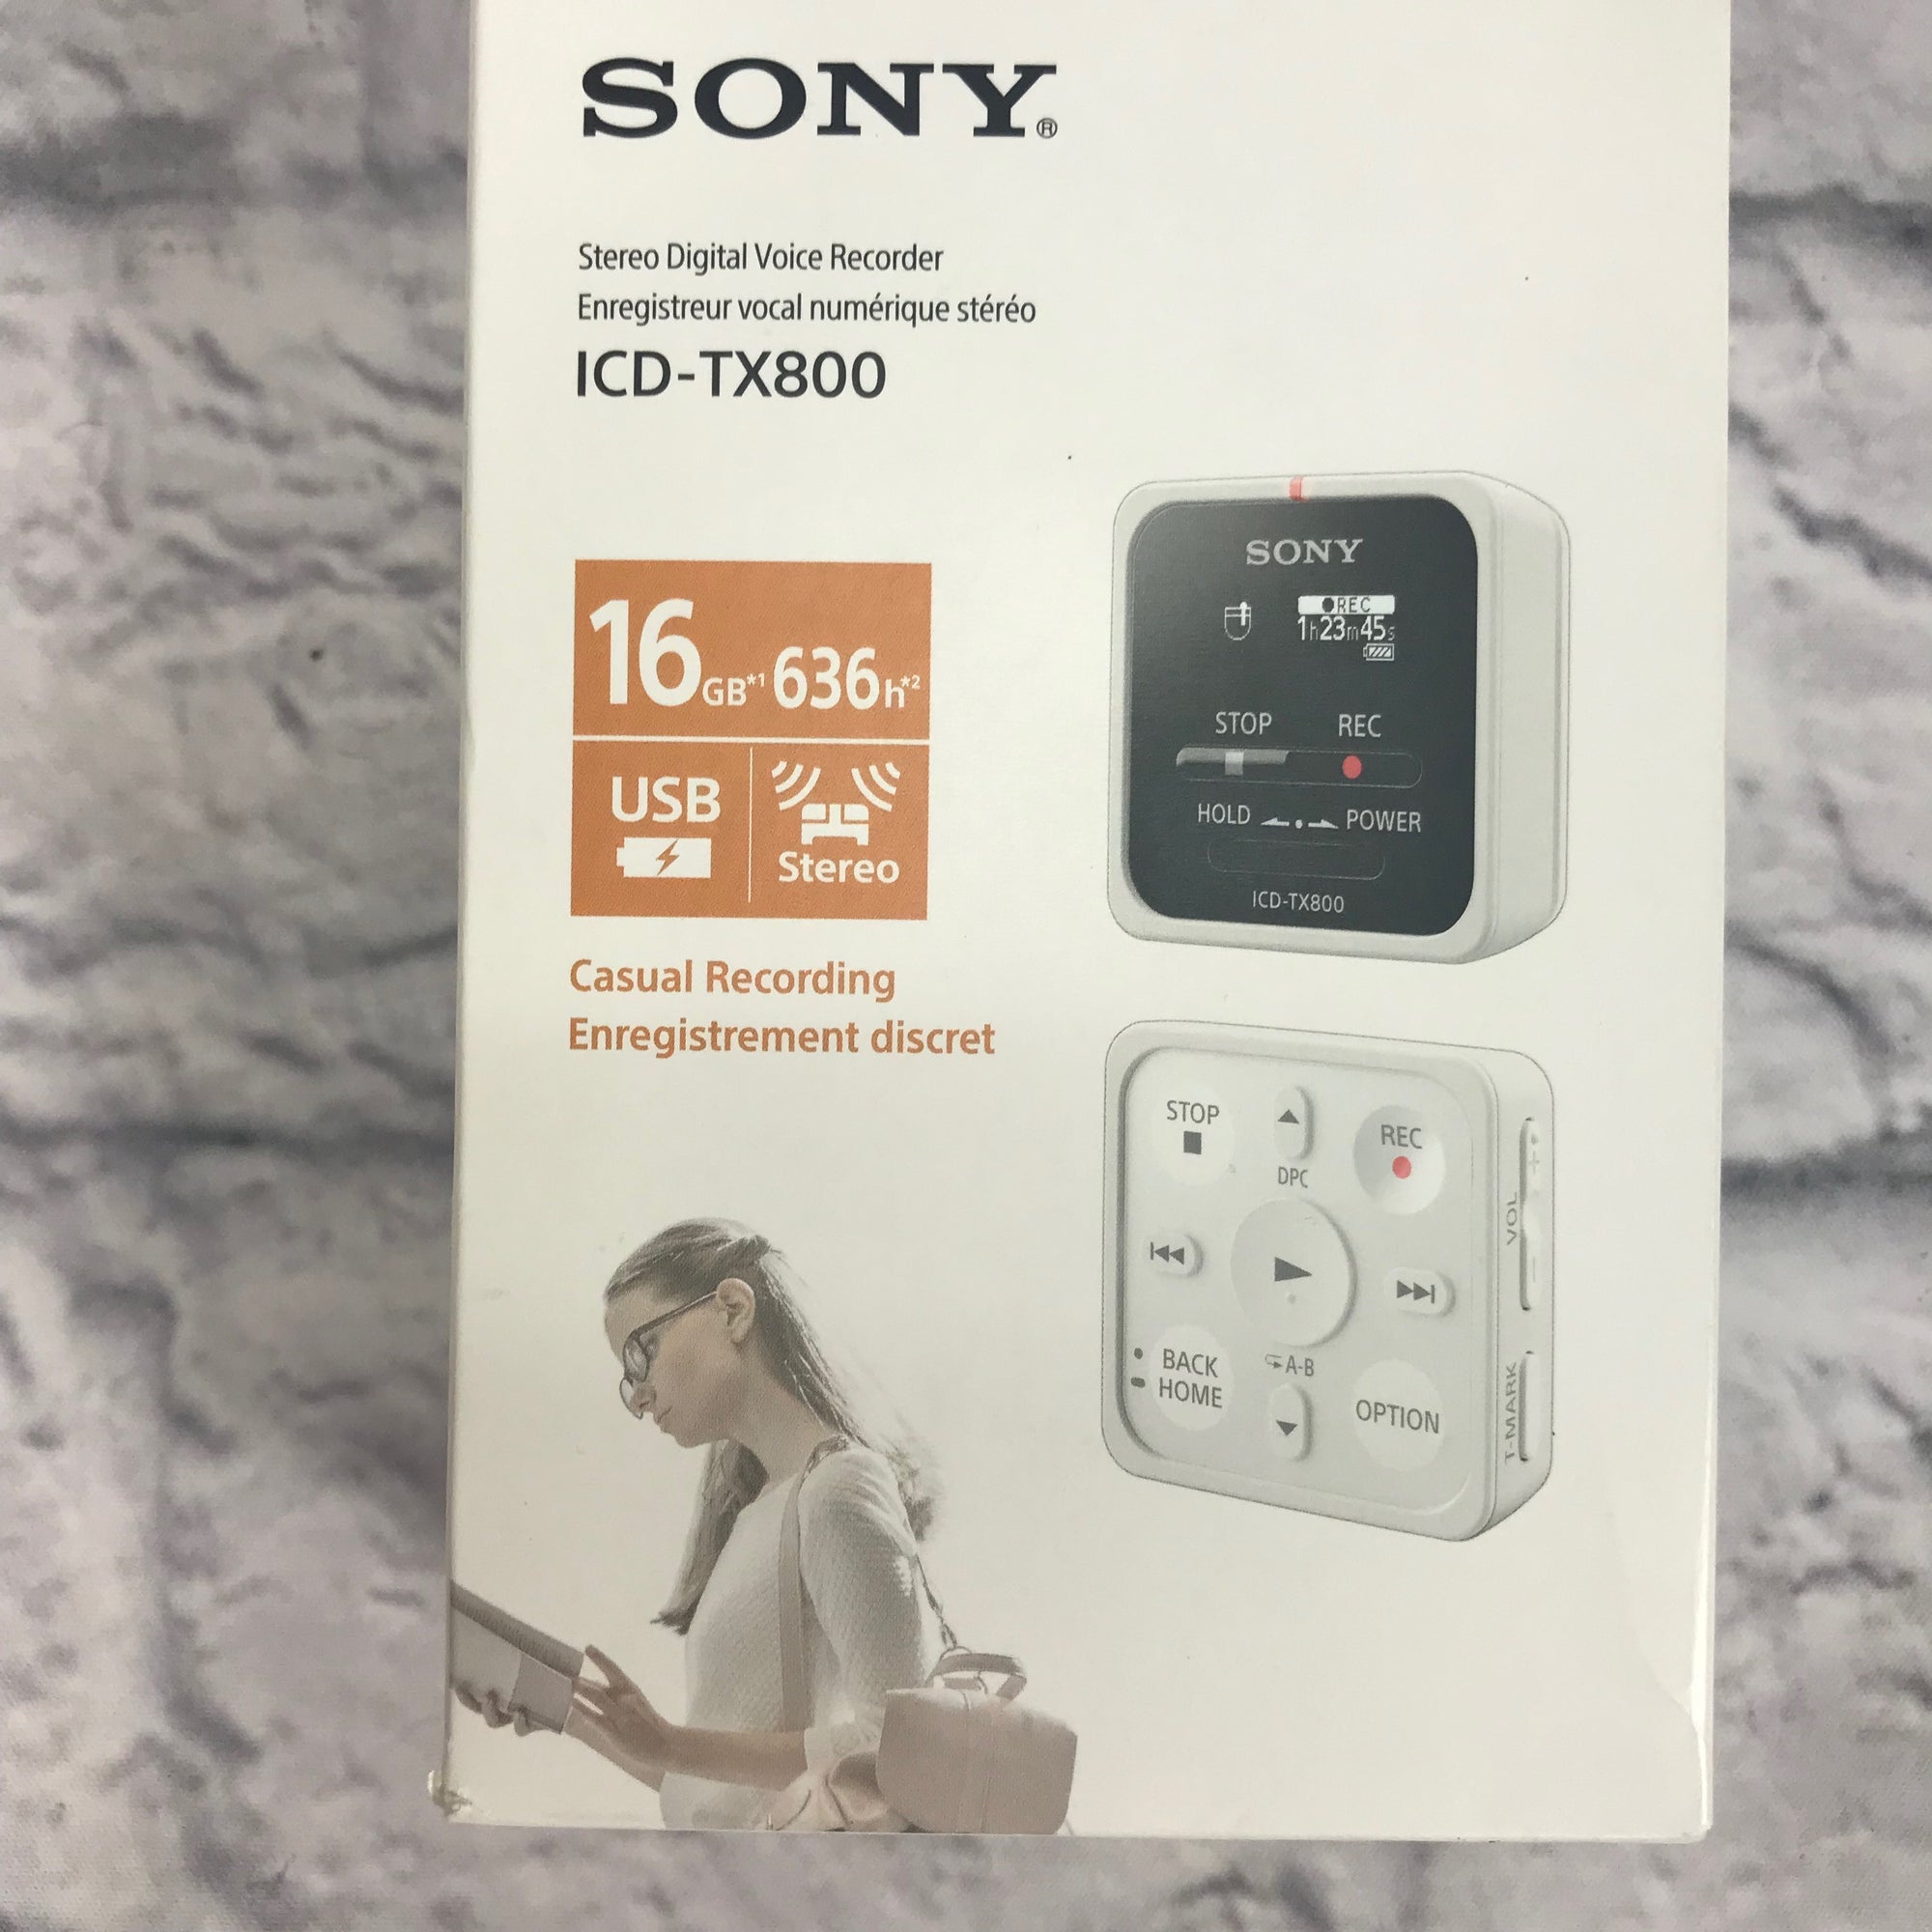 Sony ICD-TX800 Stereo Digital Voice Recorder with Remote 